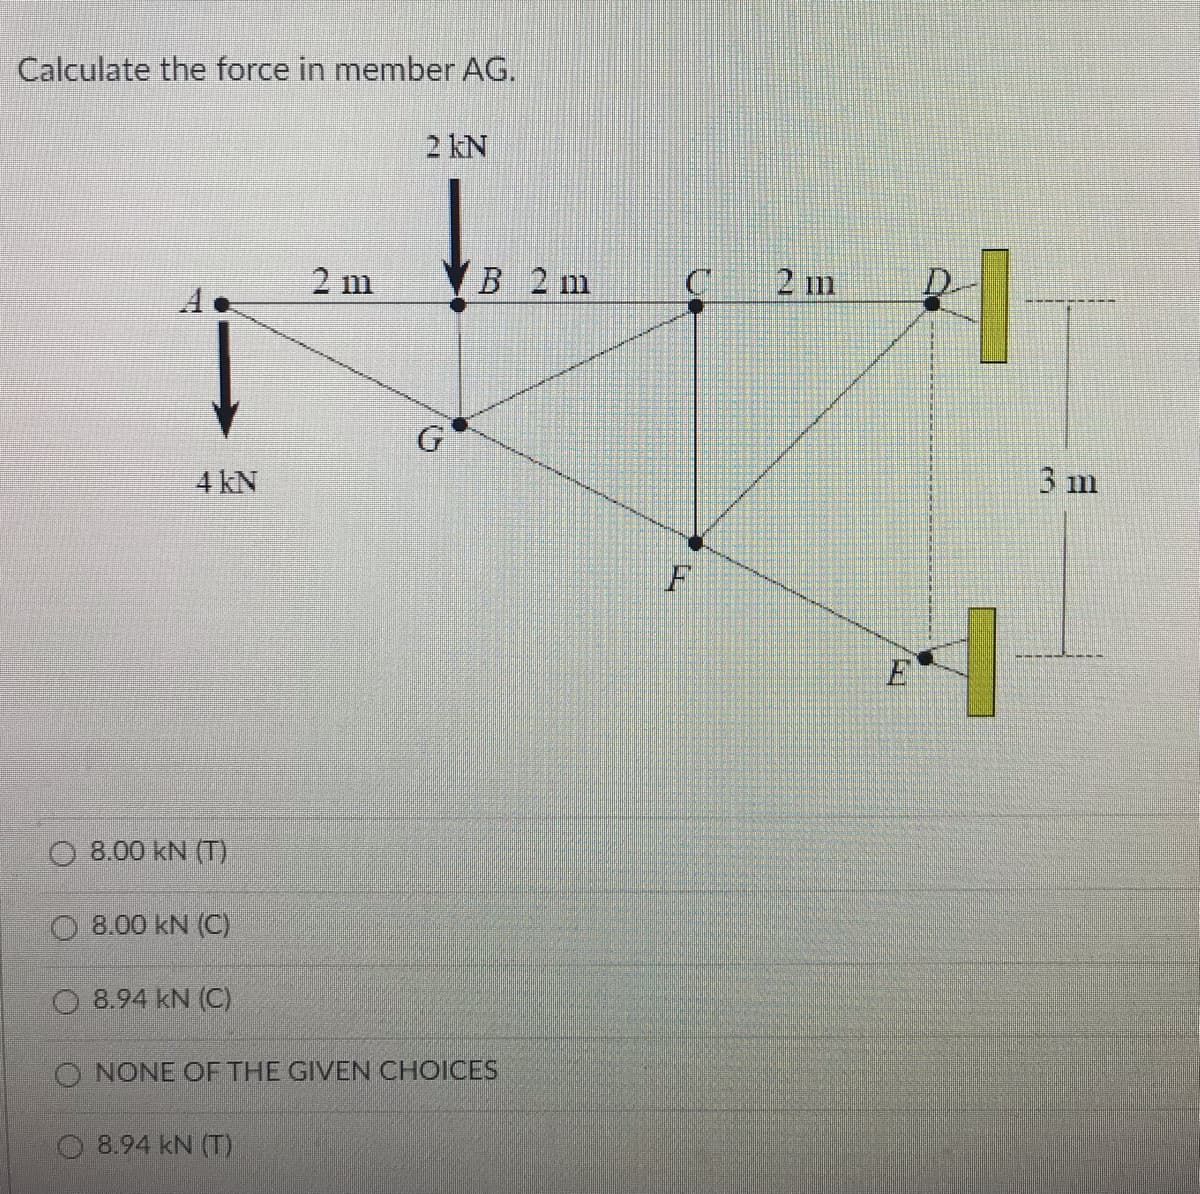 Calculate the force in member AG.
2 kN
2 m
B 2 m
C
2 m
D.
G
3 m
4 kN
F
O 8.00 kN (T)
8.00 kN (C)
O 8.94 kN (C)
O NONE OF THE GIVEN CHOICES
8.94 kN (T)
